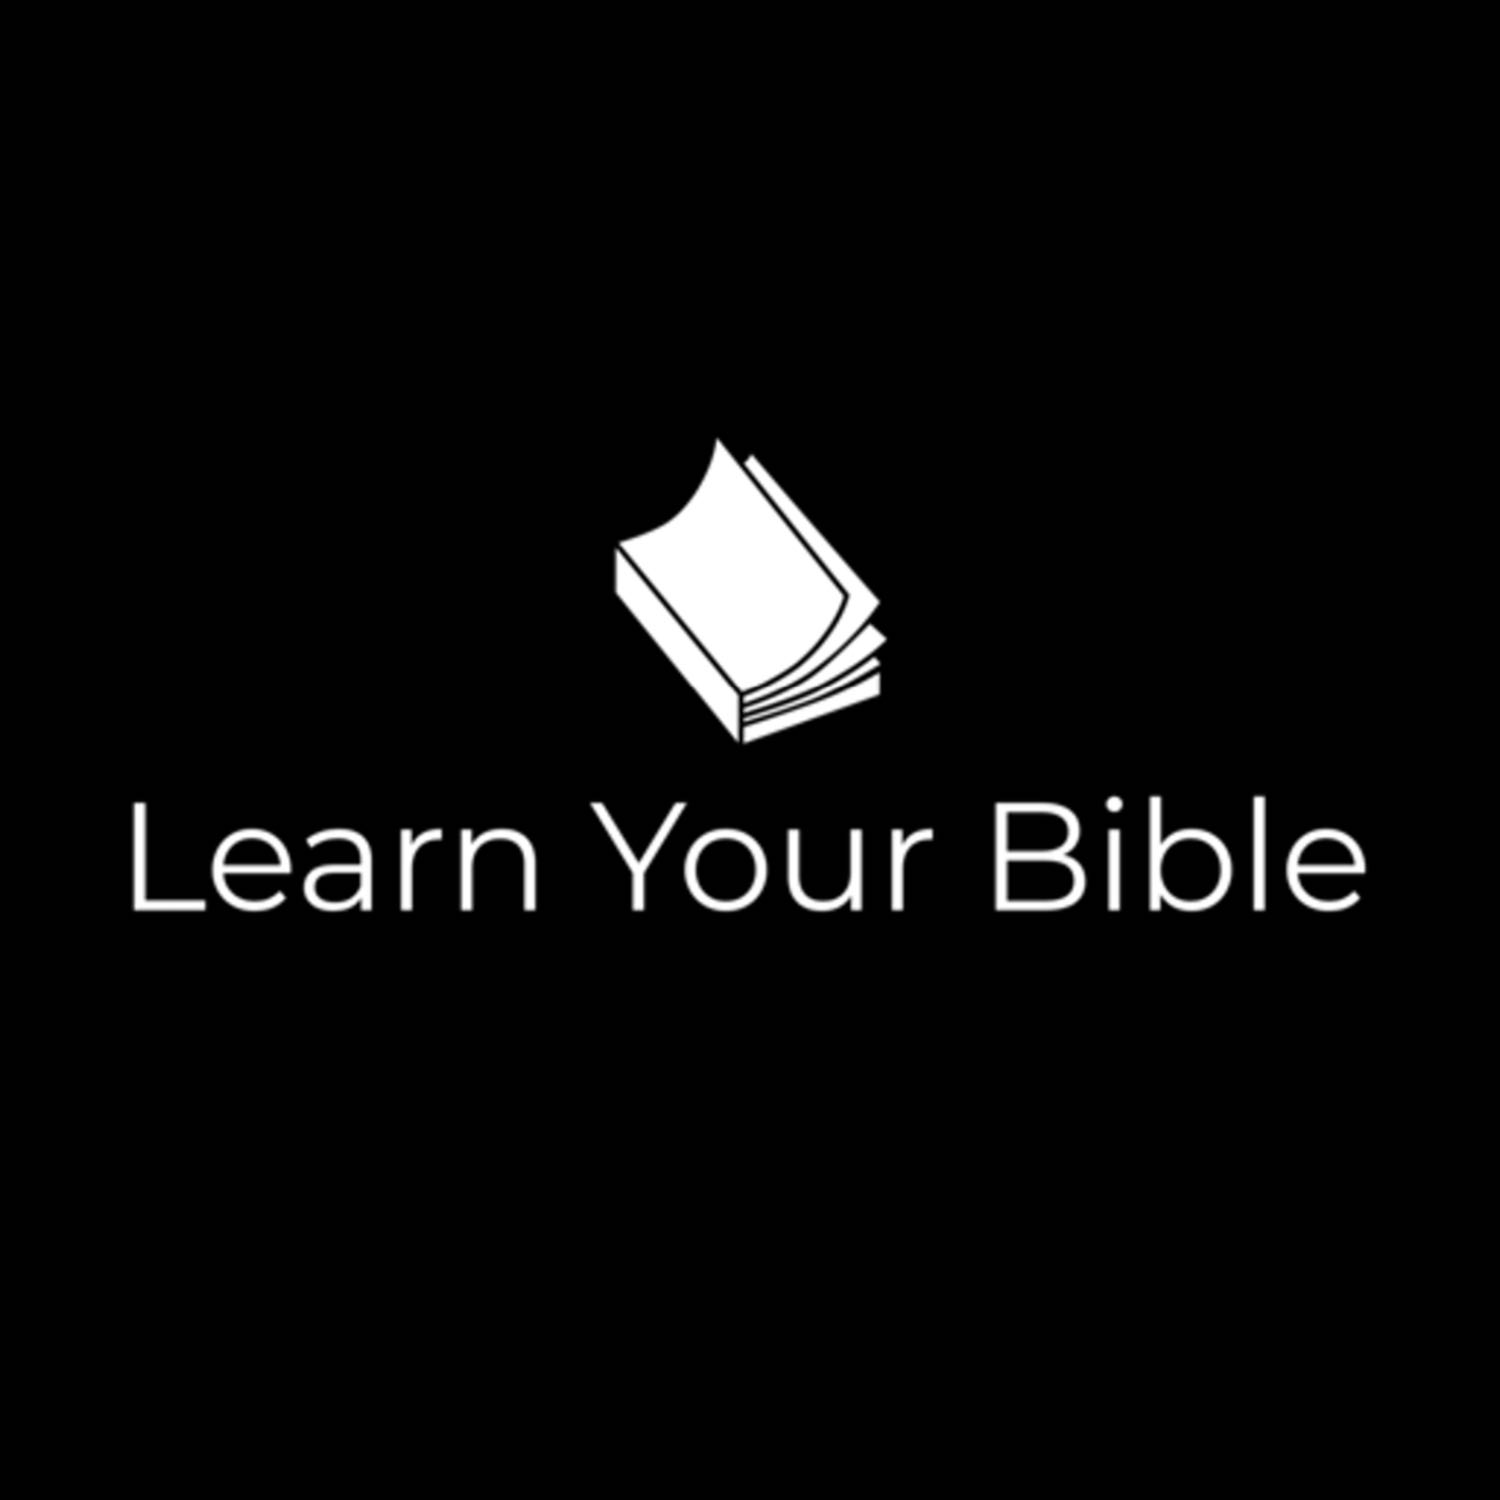 Learn Your Bible